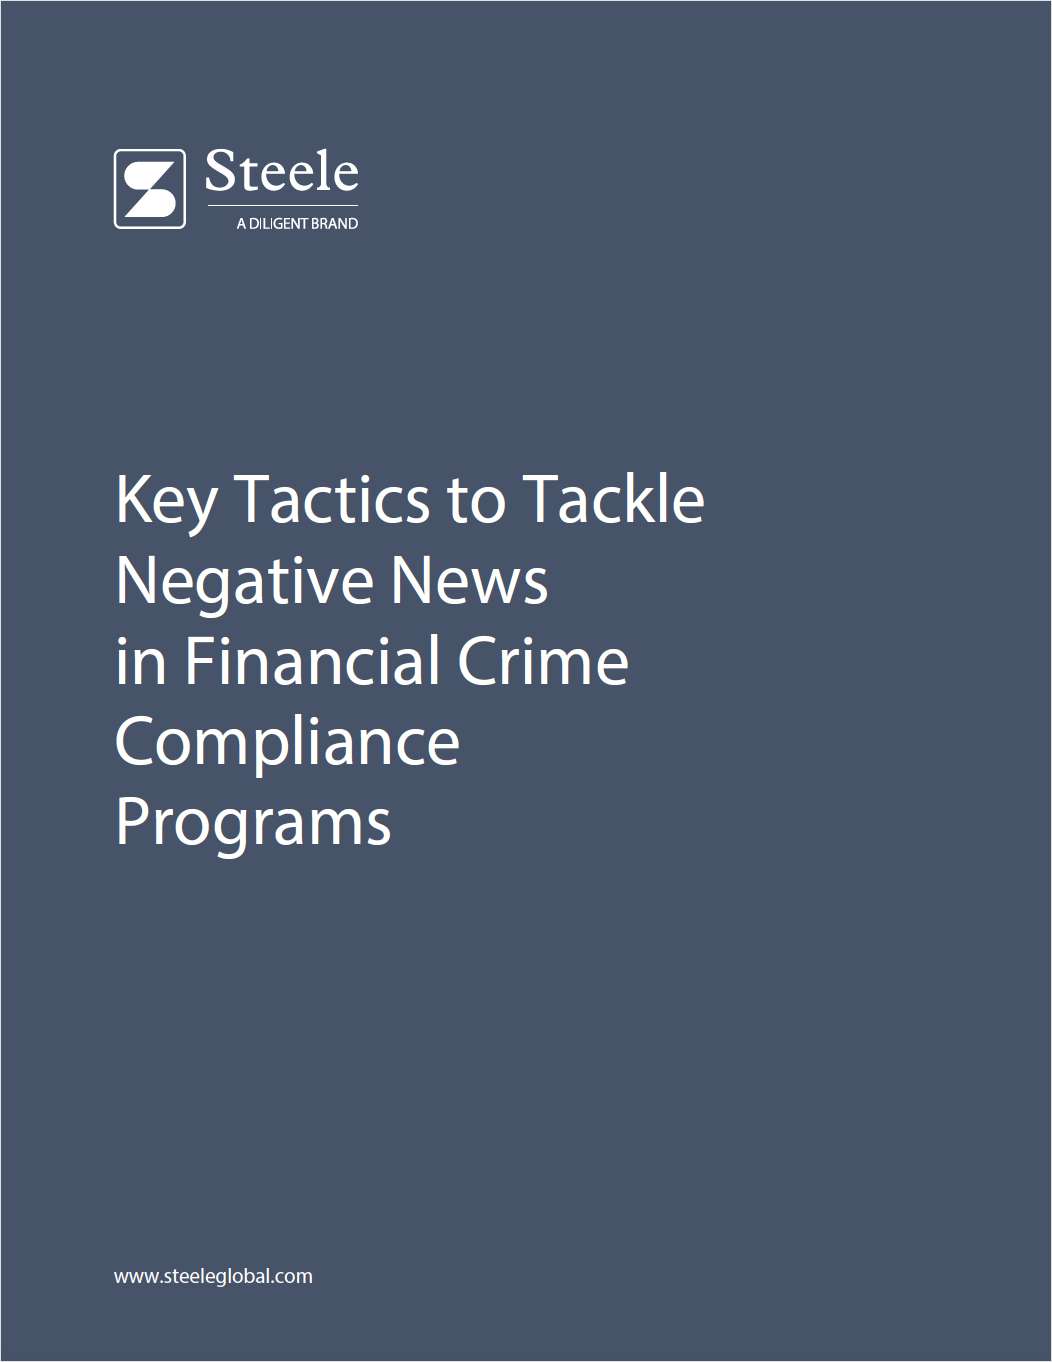 Key Tactics to Tackle Negative News in Financial Crime Compliance Programs